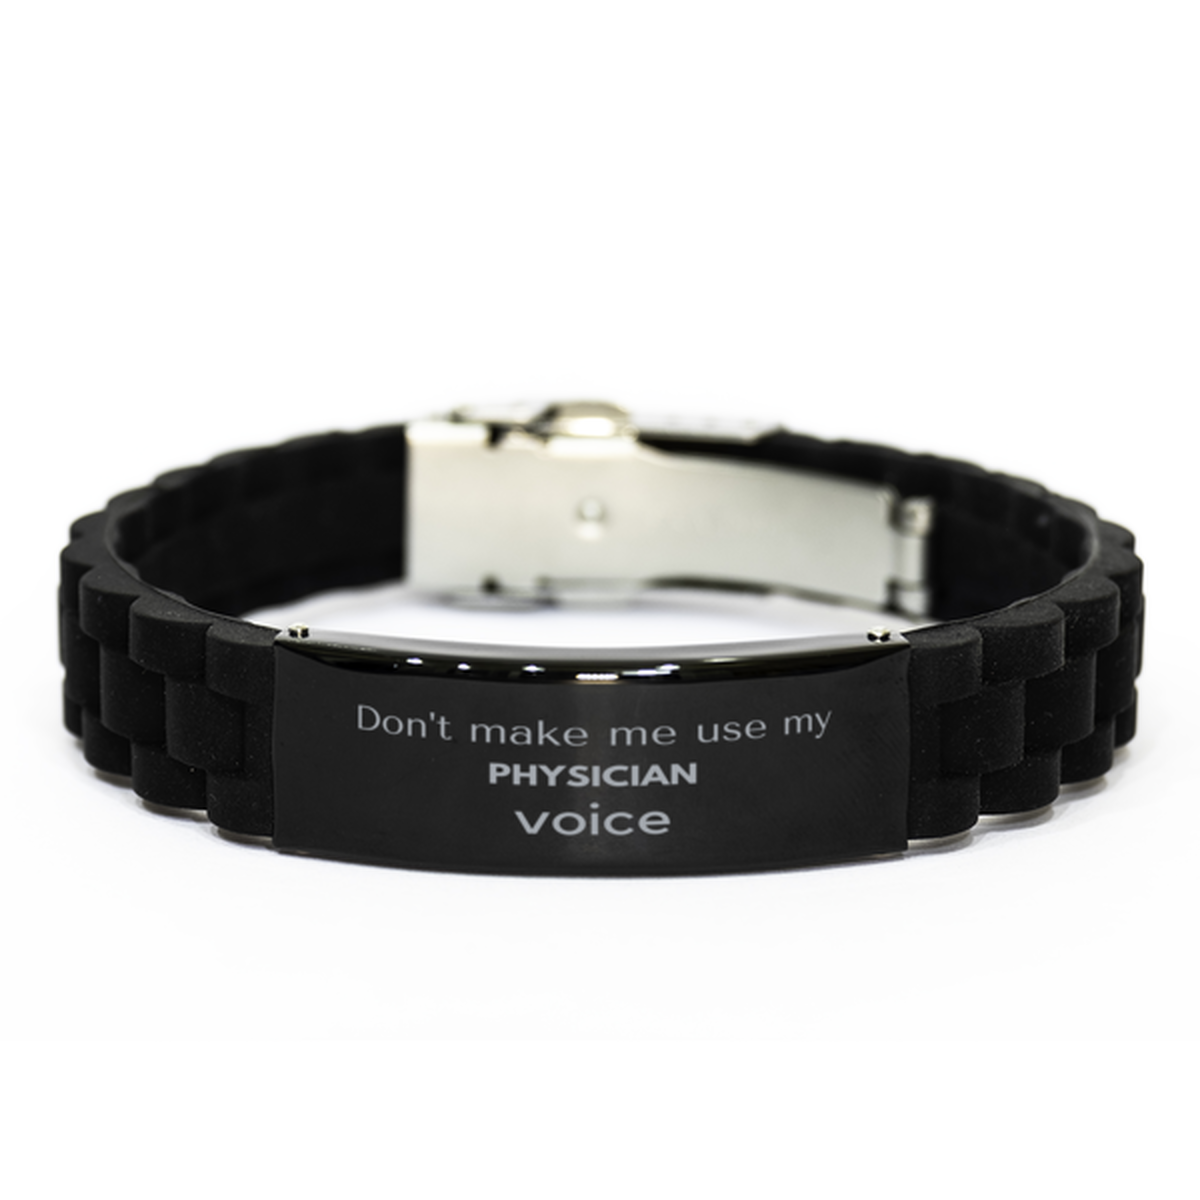 Don't make me use my Physician voice, Sarcasm Physician Gifts, Christmas Physician Black Glidelock Clasp Bracelet Birthday Unique Gifts For Physician Coworkers, Men, Women, Colleague, Friends